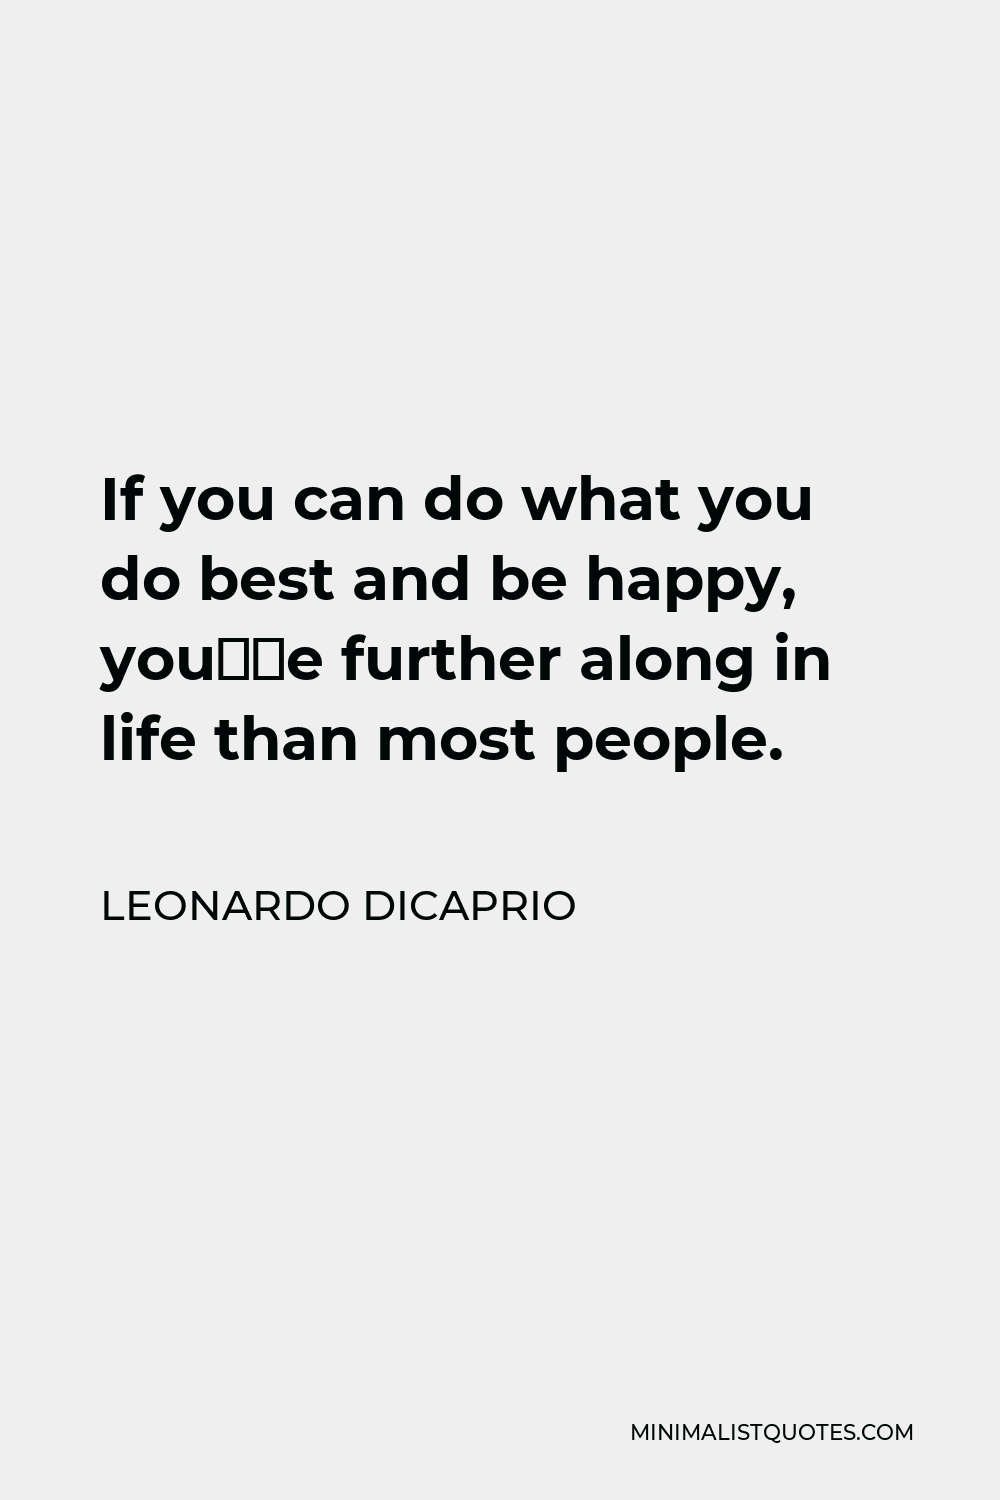 Leonardo DiCaprio Quote - If you can do what you do best and be happy, you’re further along in life than most people.